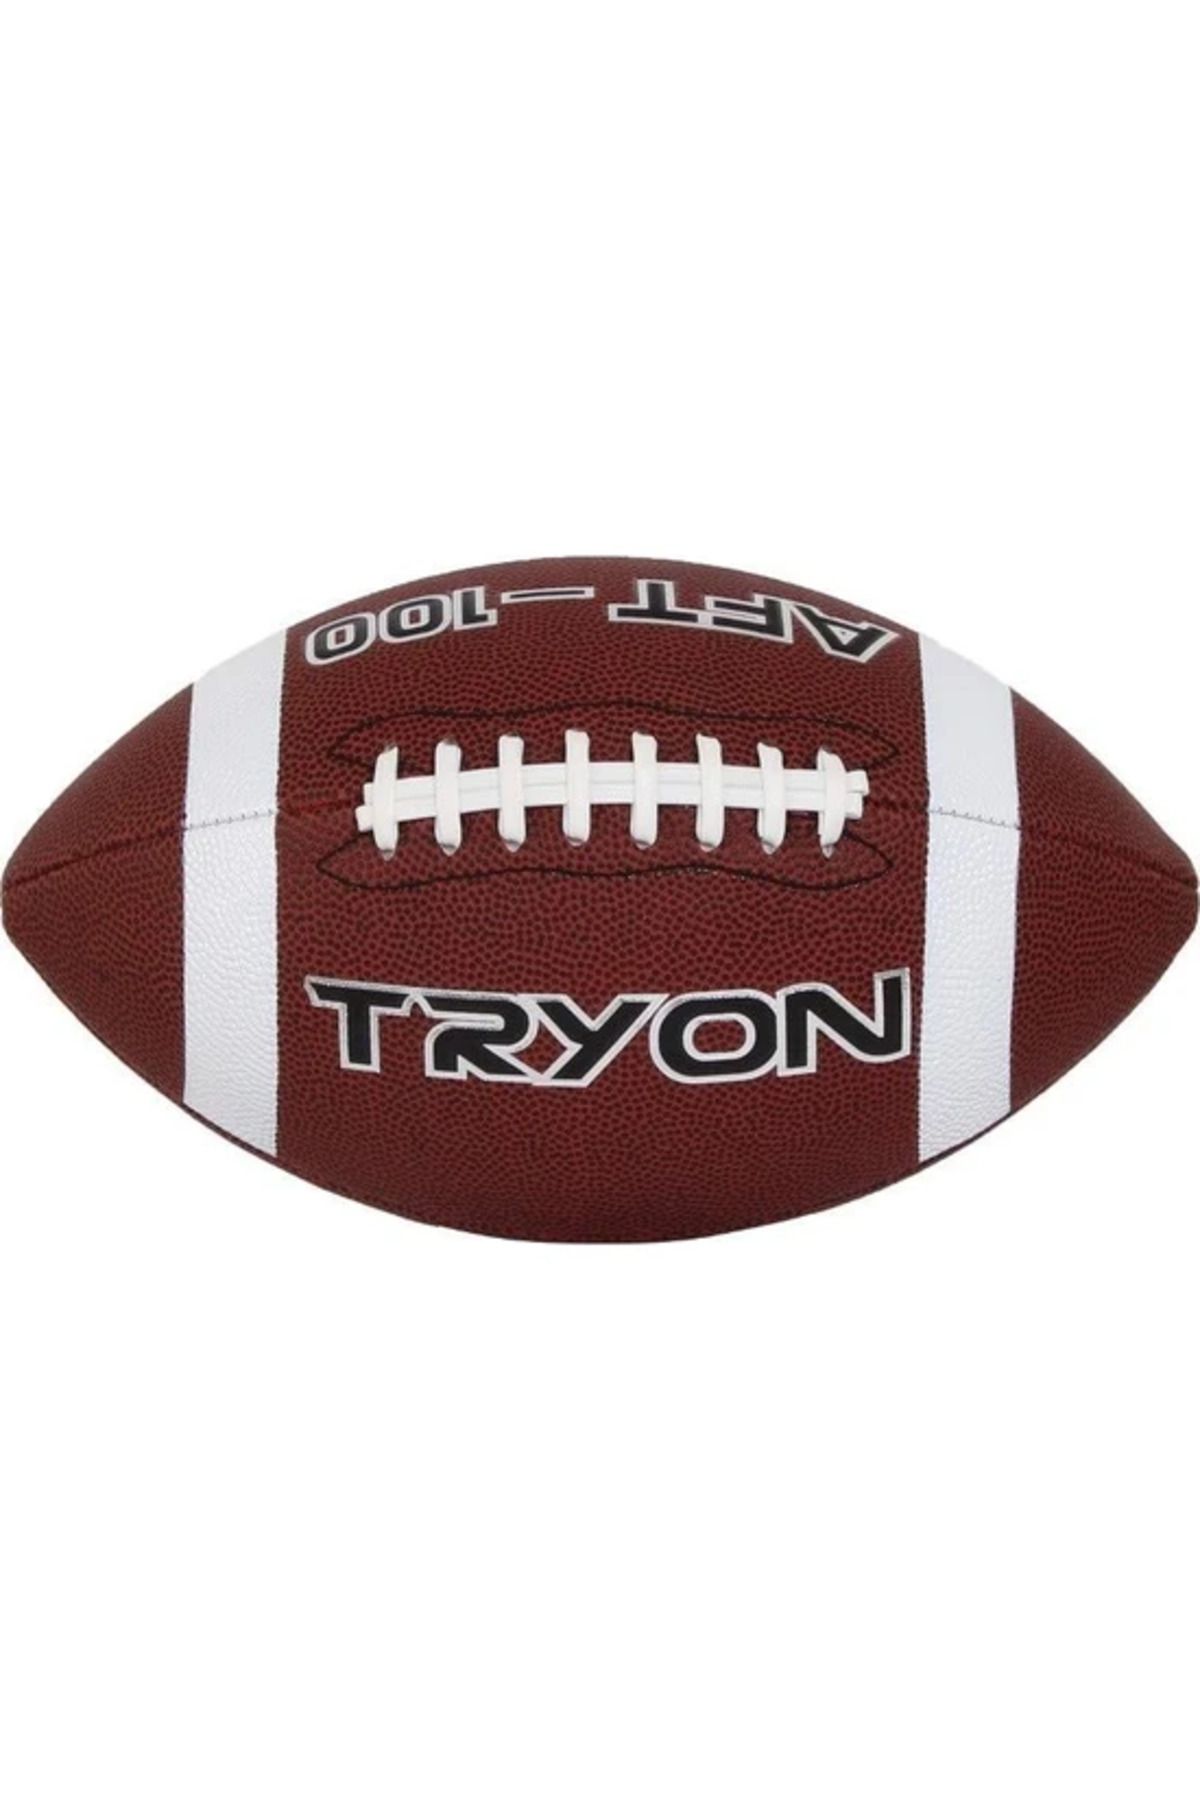 TRYON Aft-100 Tryon All-field Official Amerikan Futbol Topu